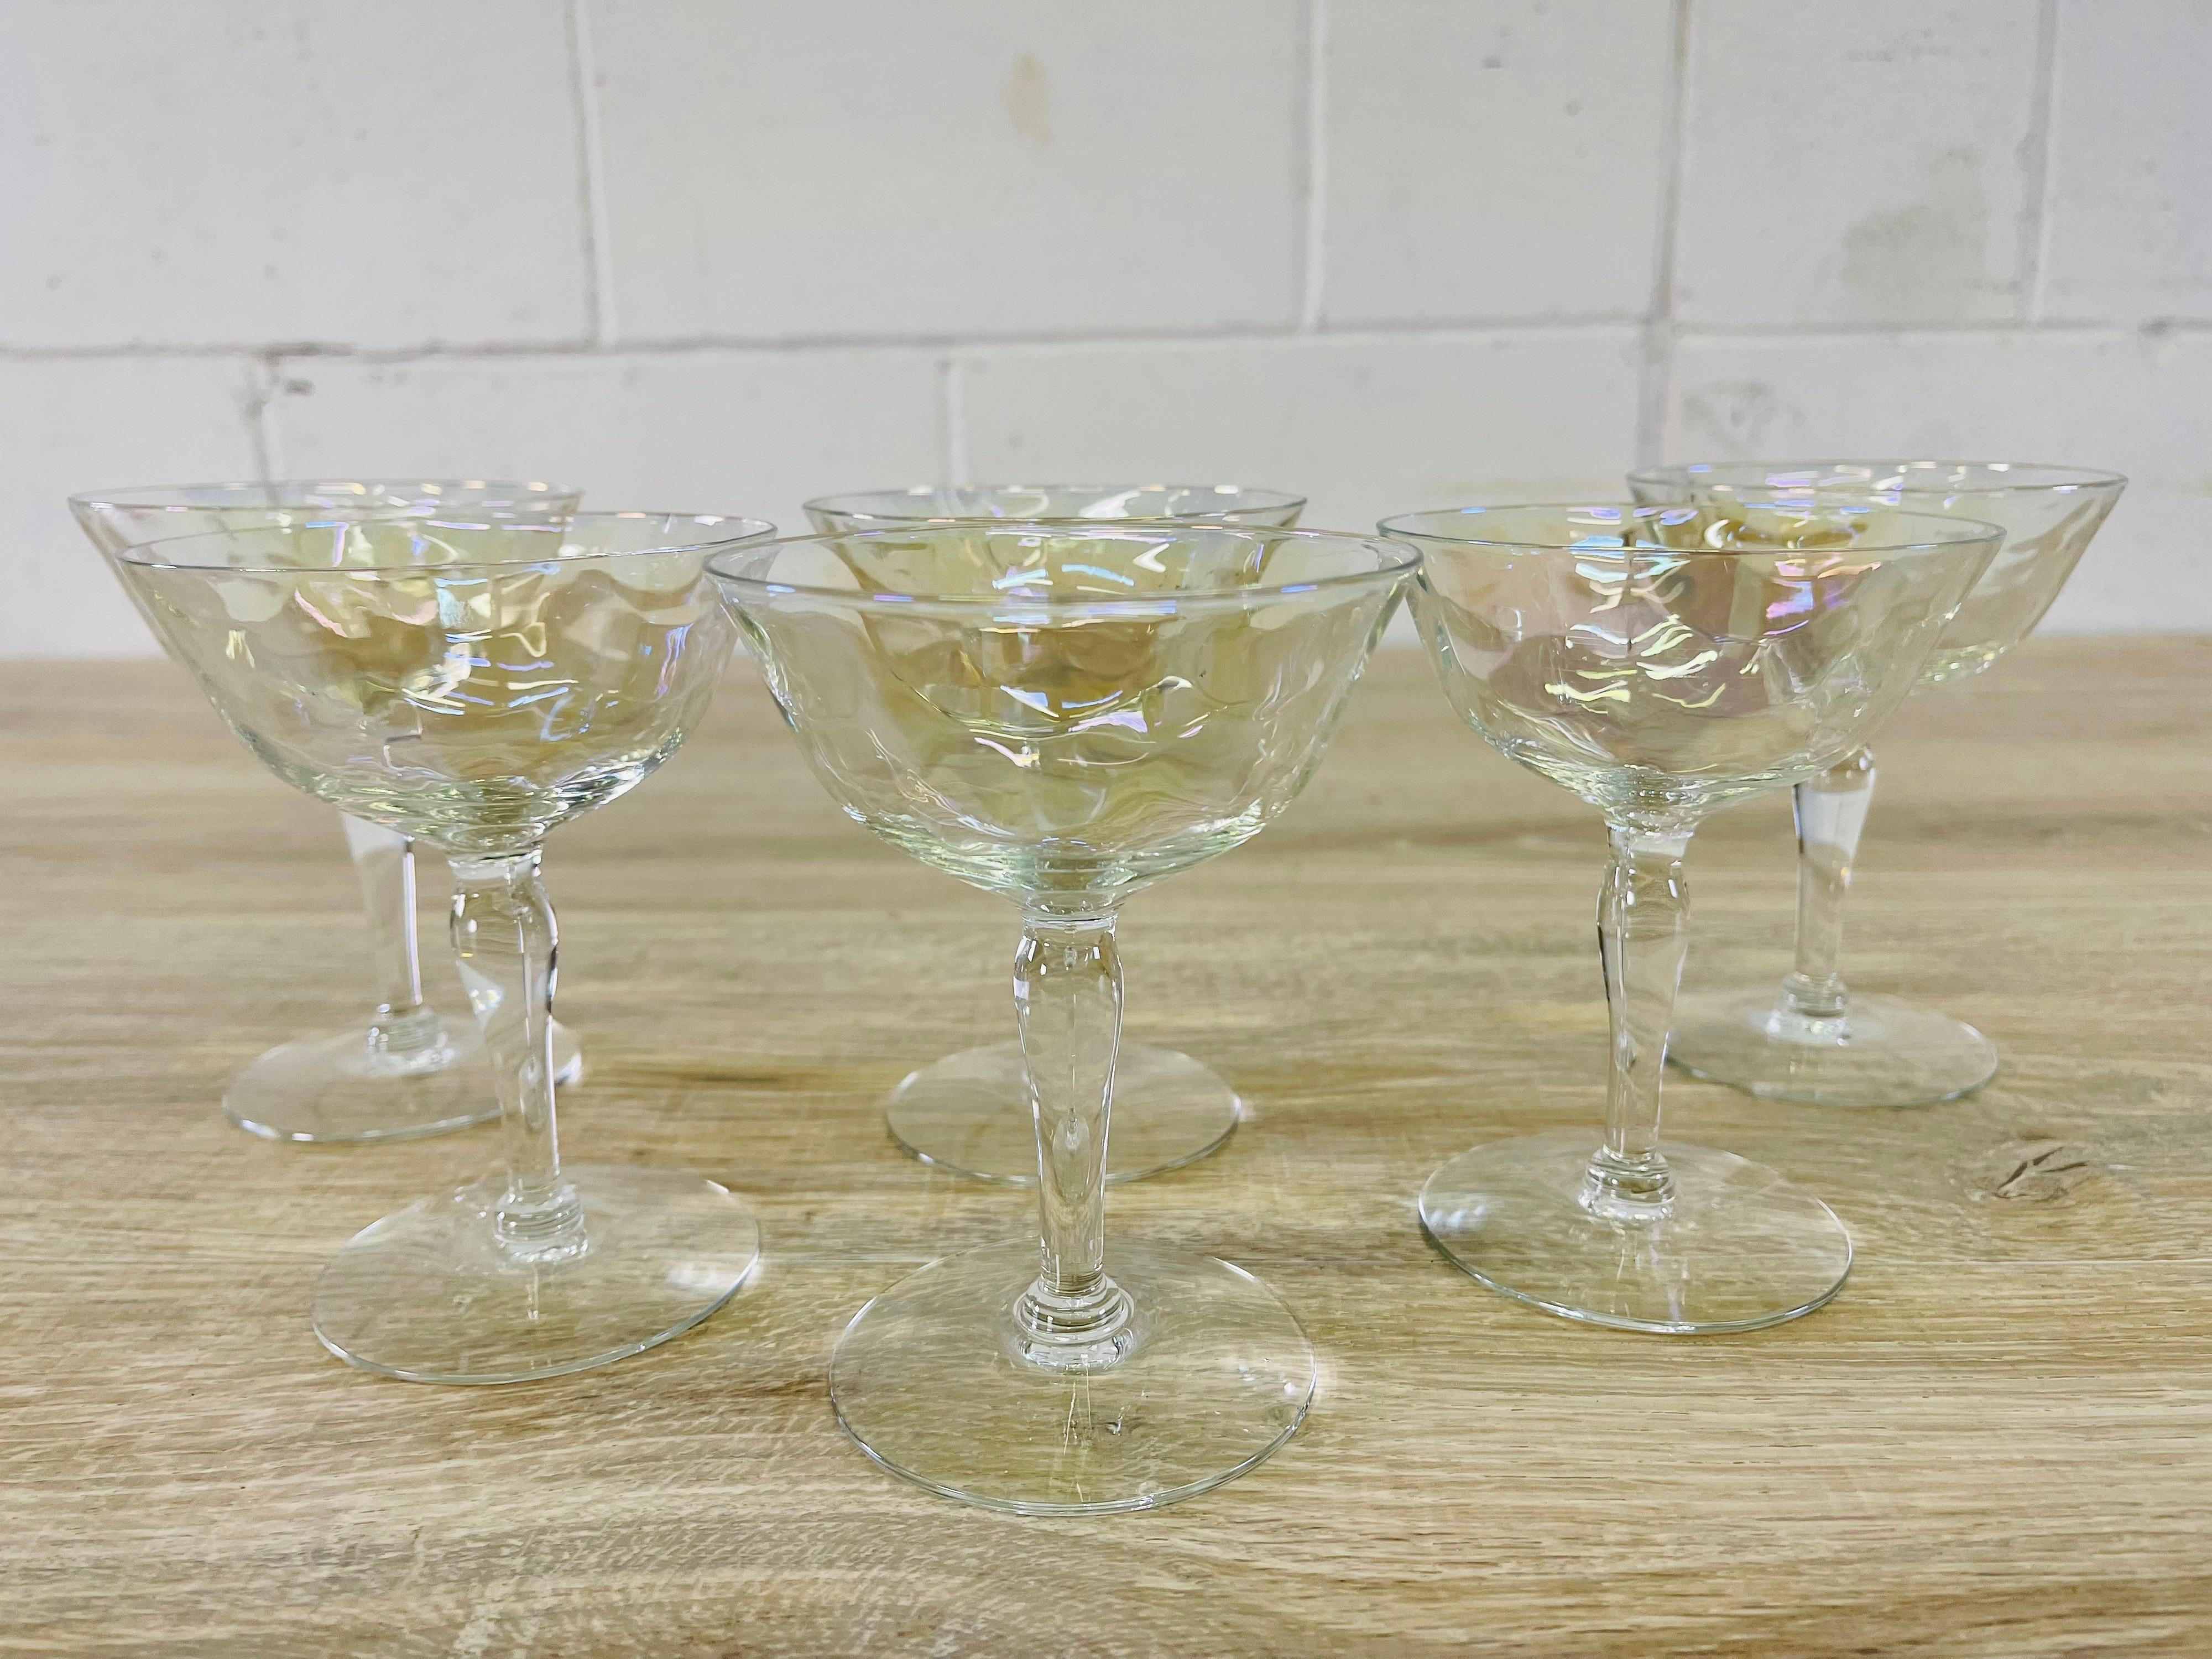 Vintage 1960s set of 6 iridescent glass coupe stems. No marks.